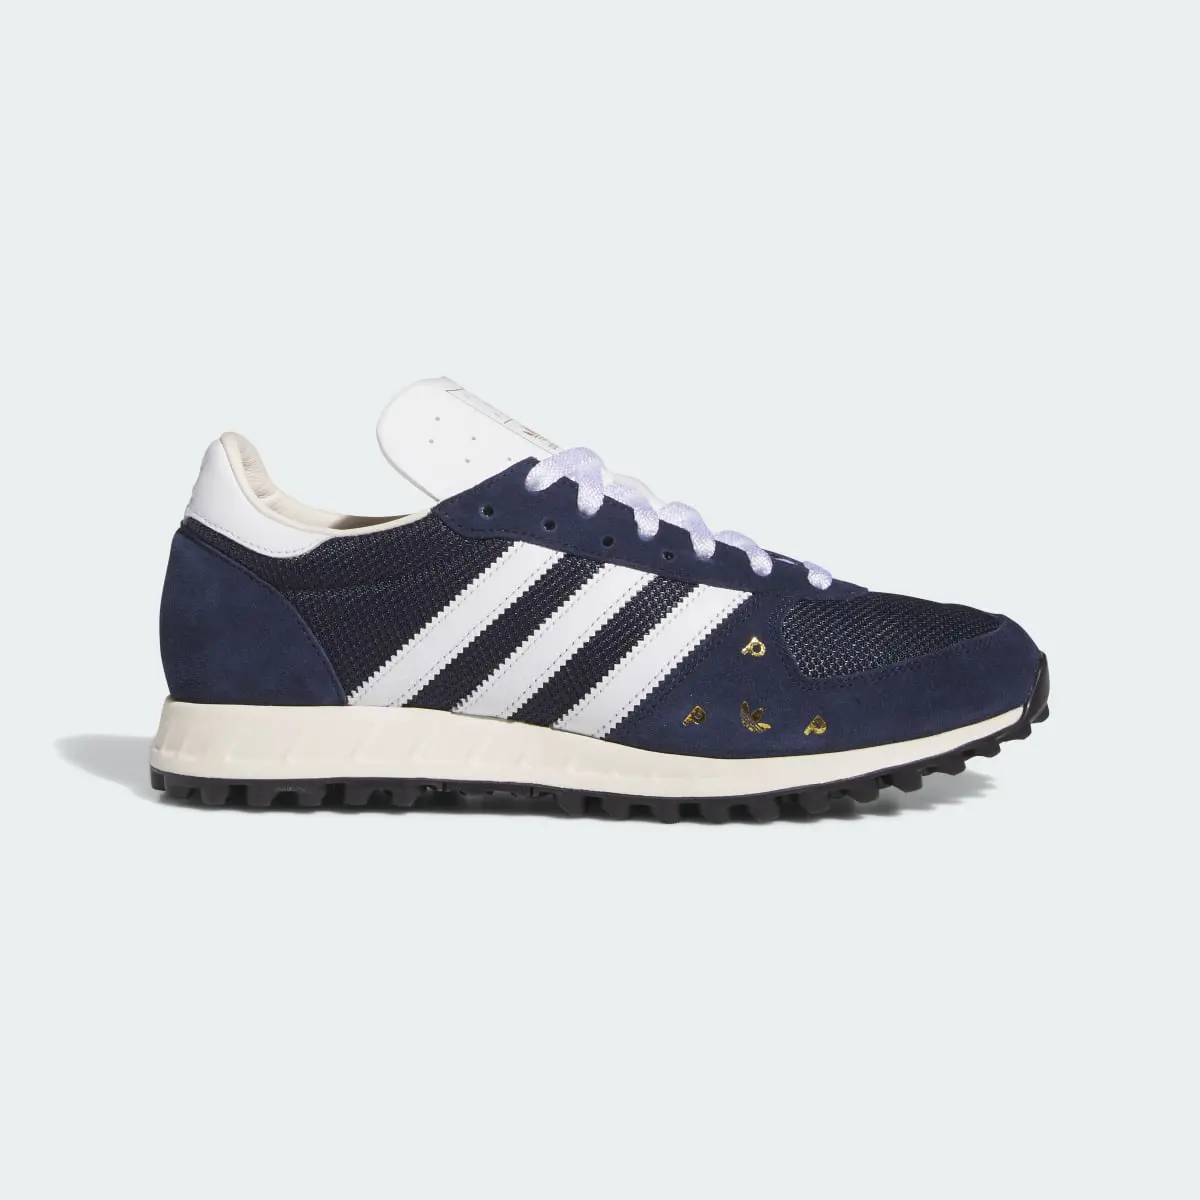 Adidas Pop Trading Co TRX Trainers. 2